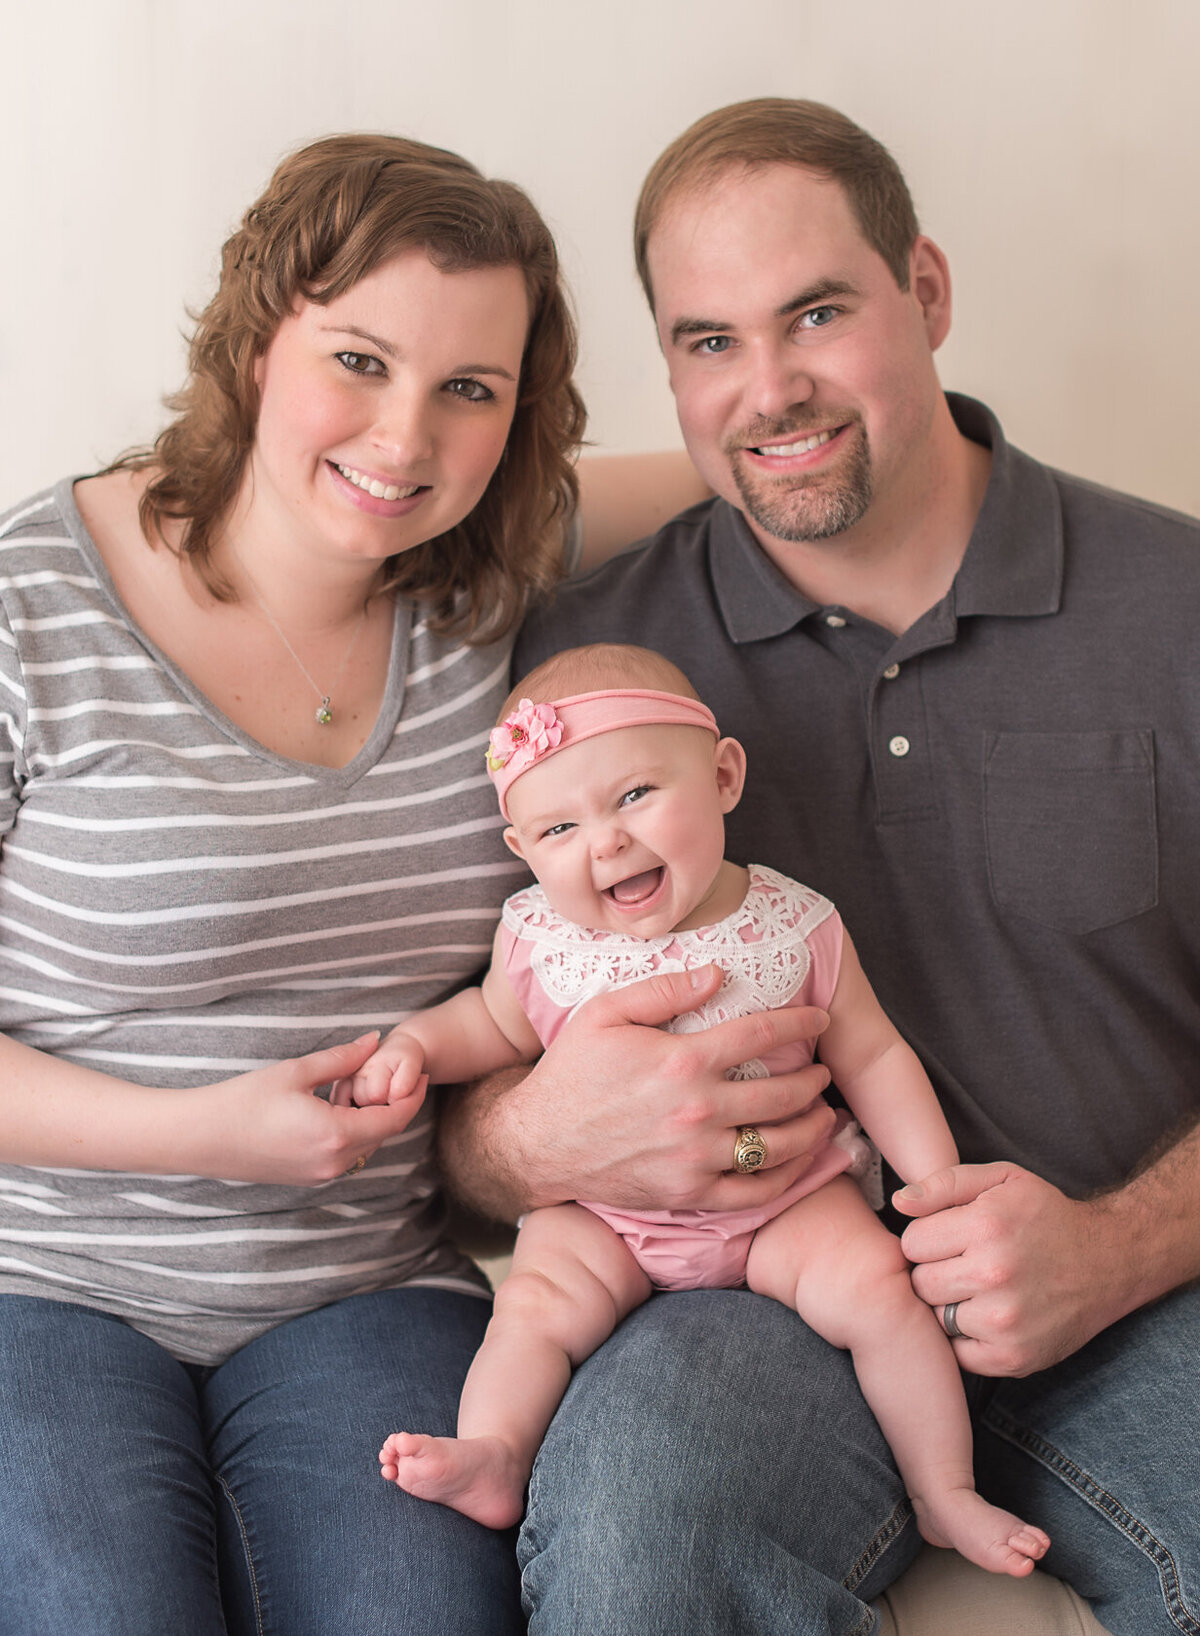 Most adorable Baby and Family portrait captured by Laura King Photography